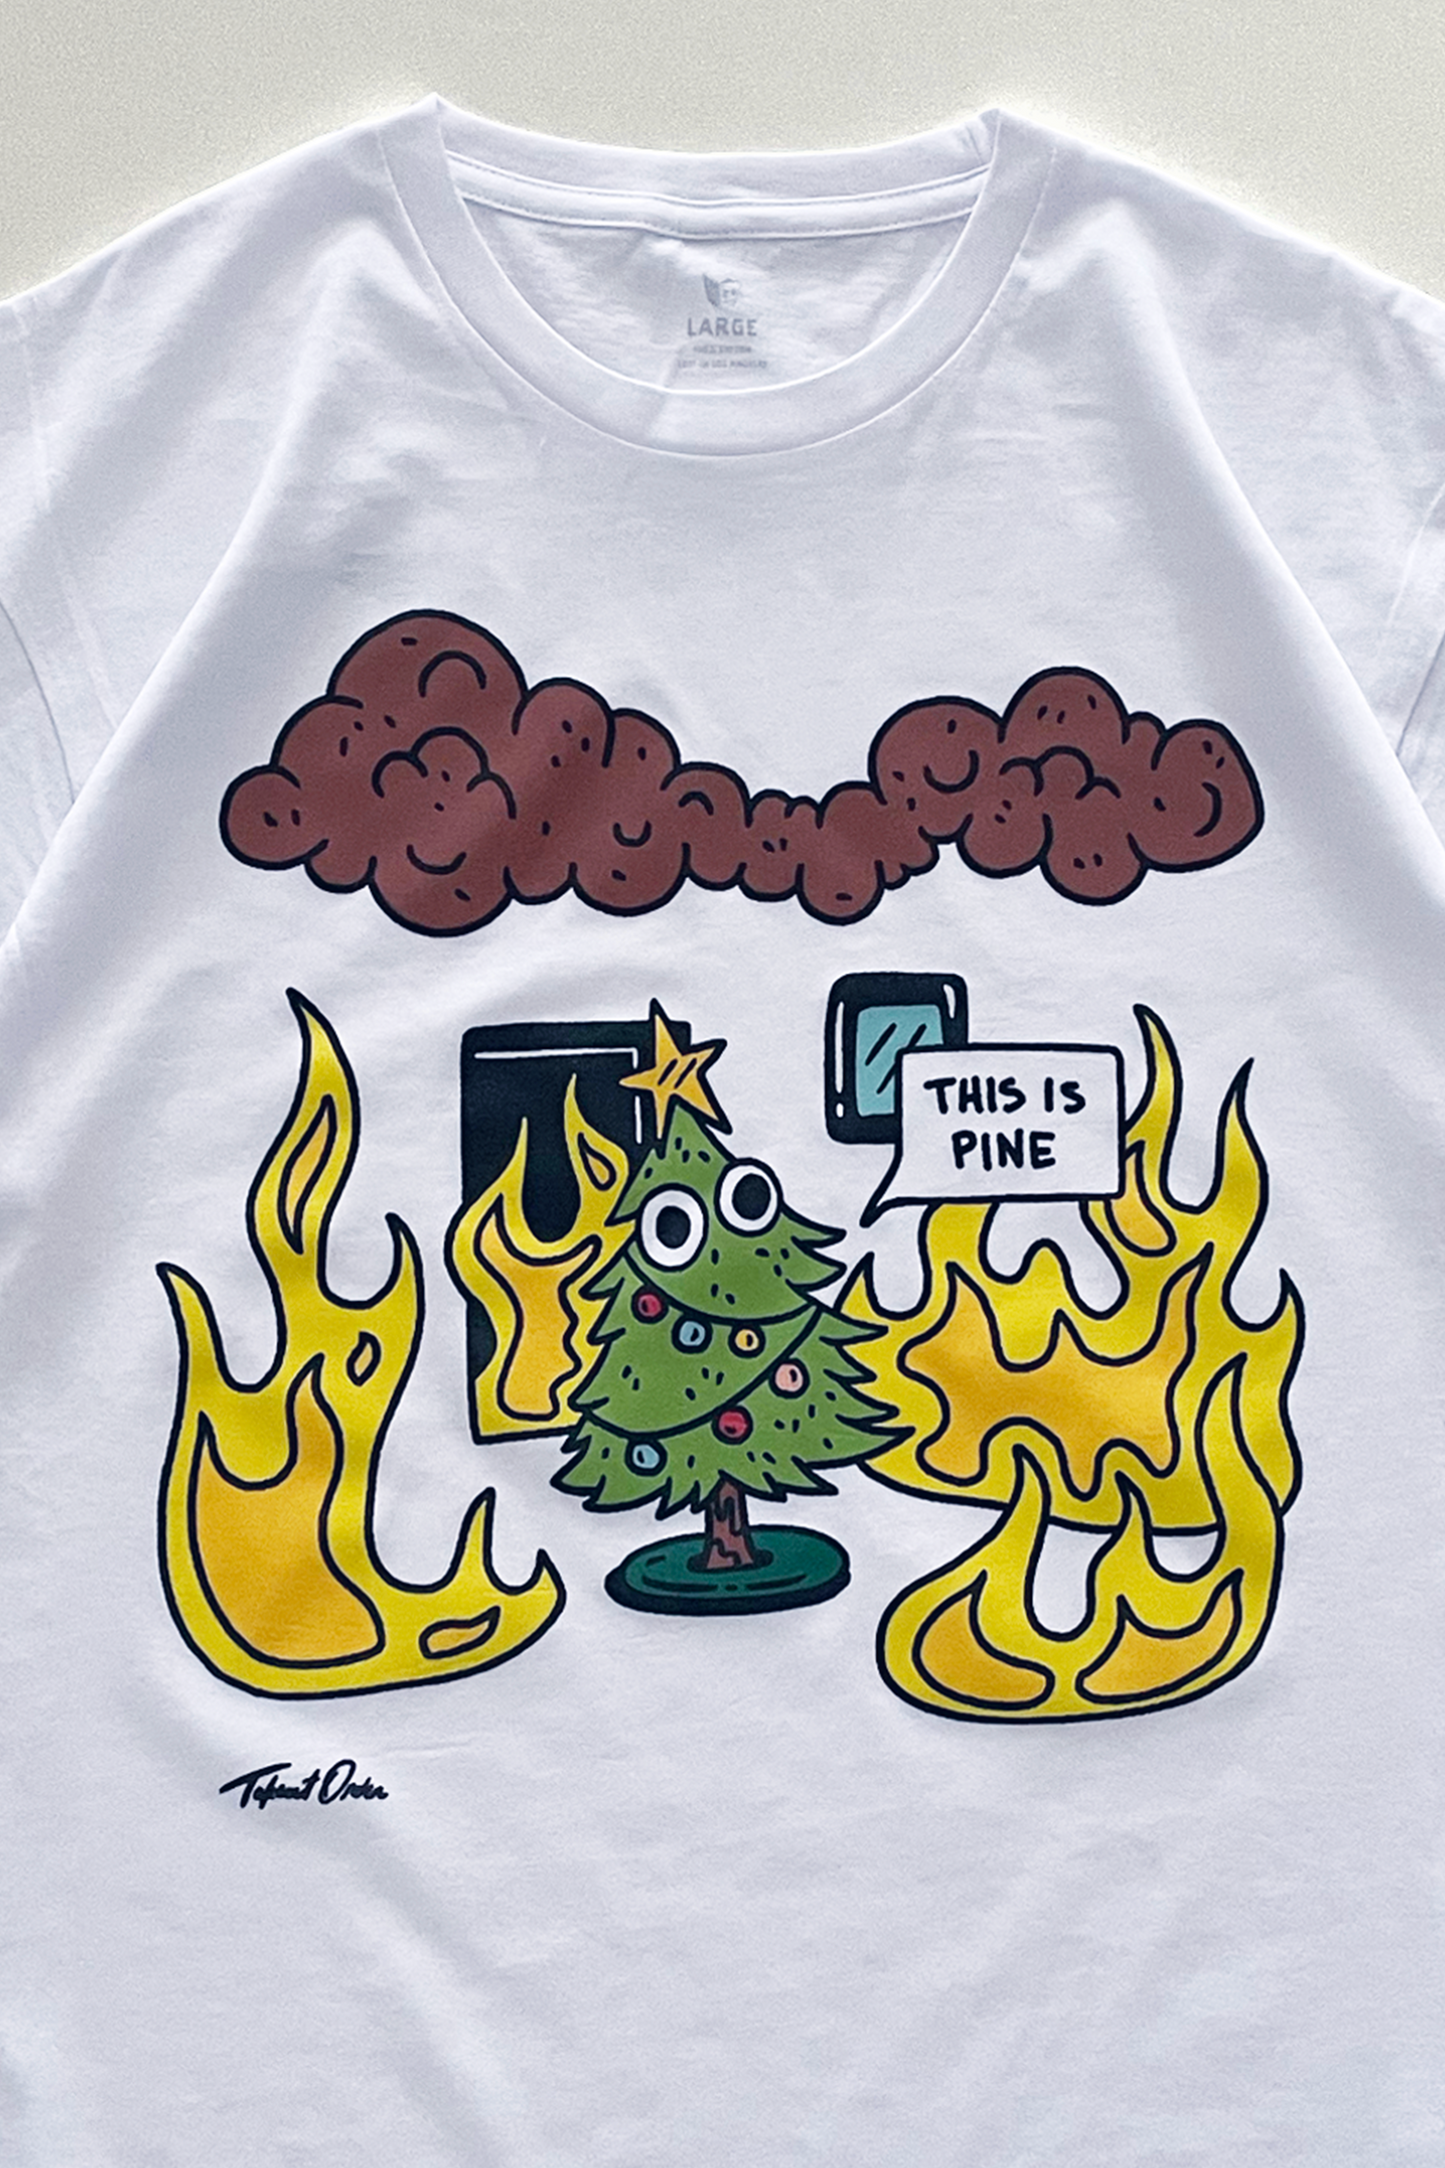 This Is Pine T-shirt